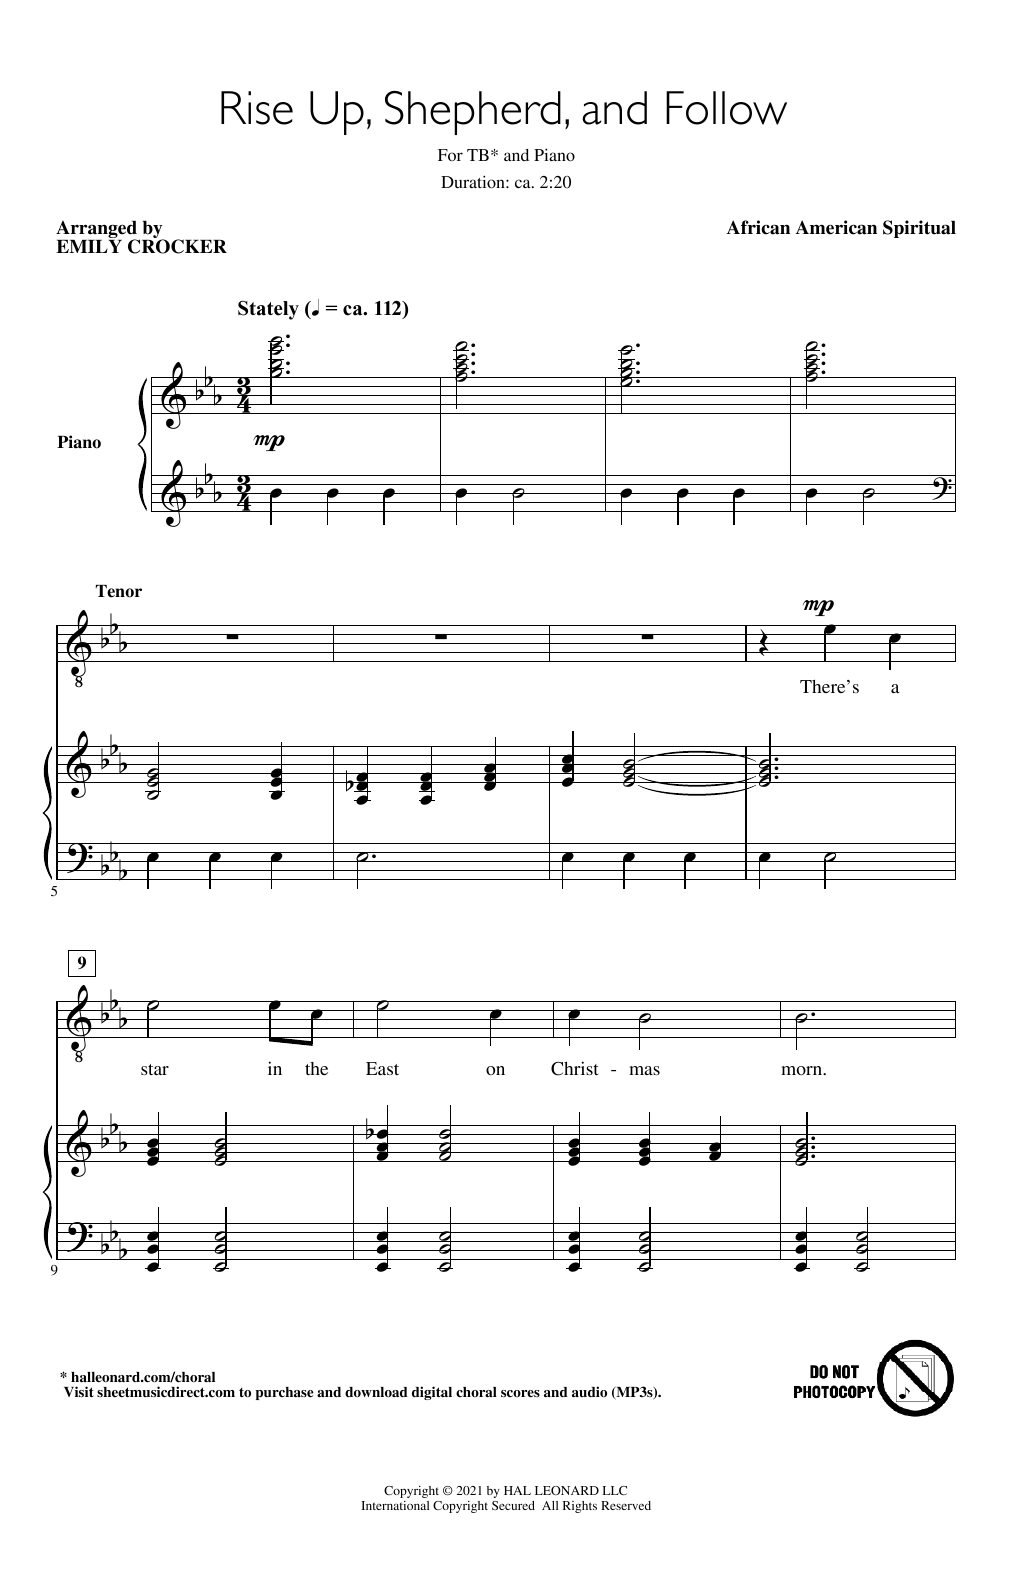 African American Spiritual Rise Up, Shepherd, And Follow (arr. Emily Crocker) sheet music notes and chords. Download Printable PDF.